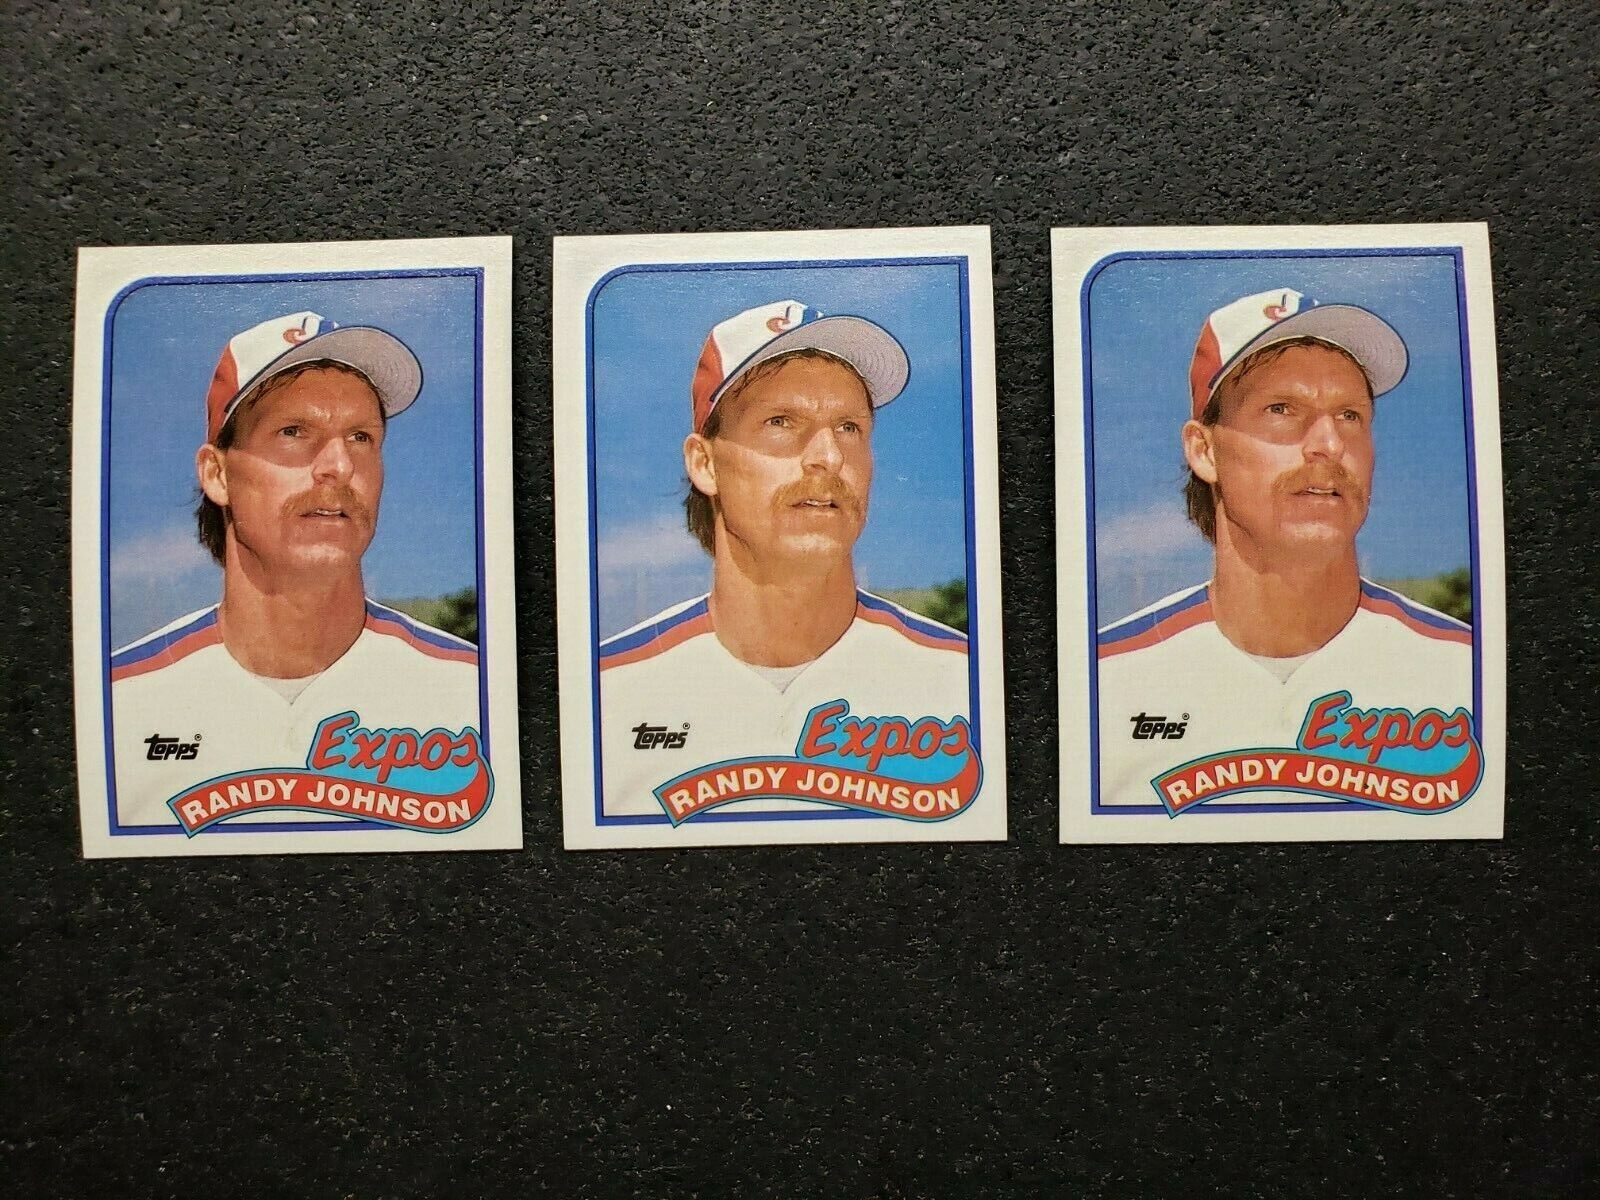 3 CARD LOT 1989 TOPPS BASEBALL RANDY JOHNSON ROOKIE CARD #647. rookie card picture